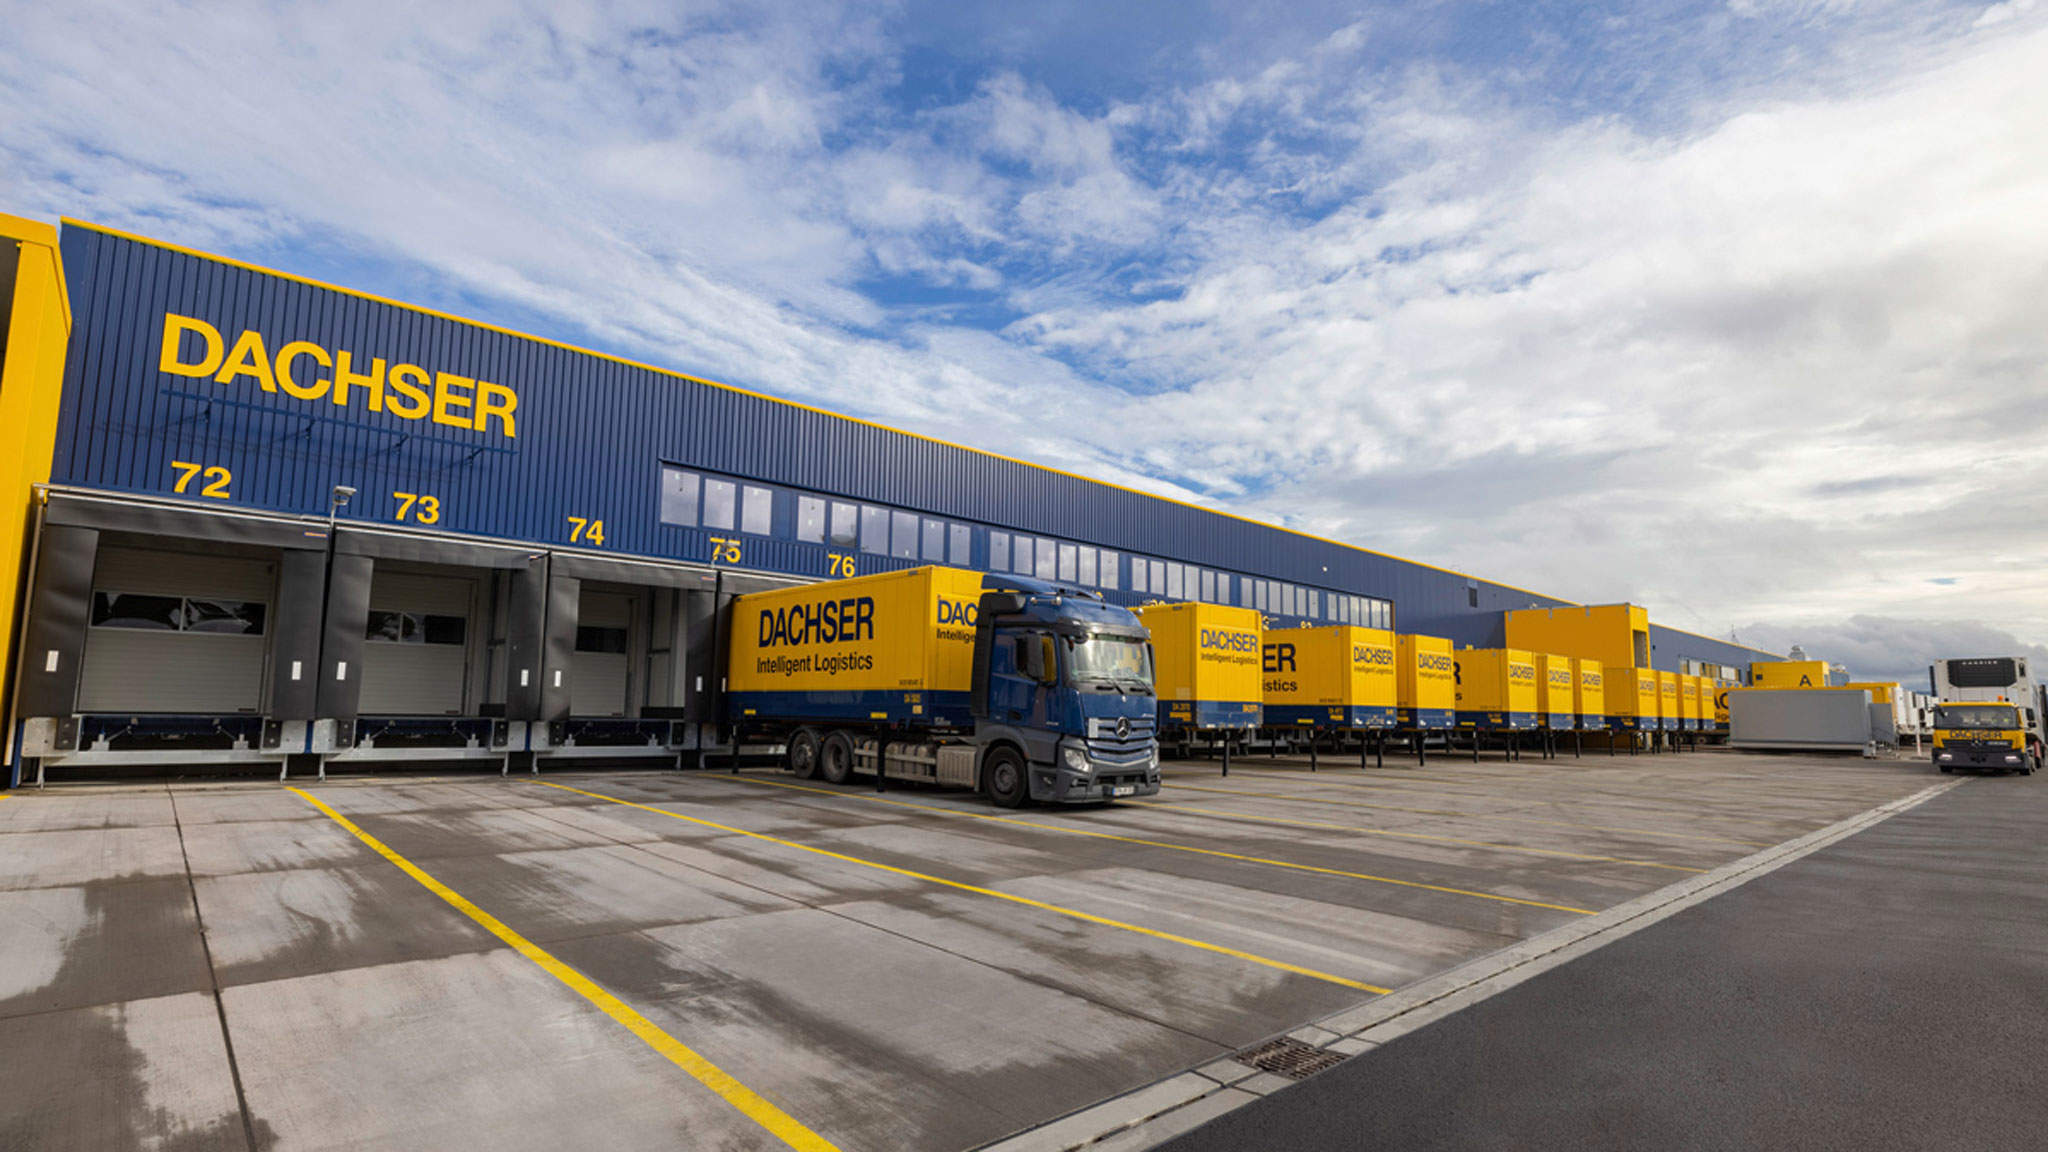 DACHSER Erfurt continues along its growth trajectory